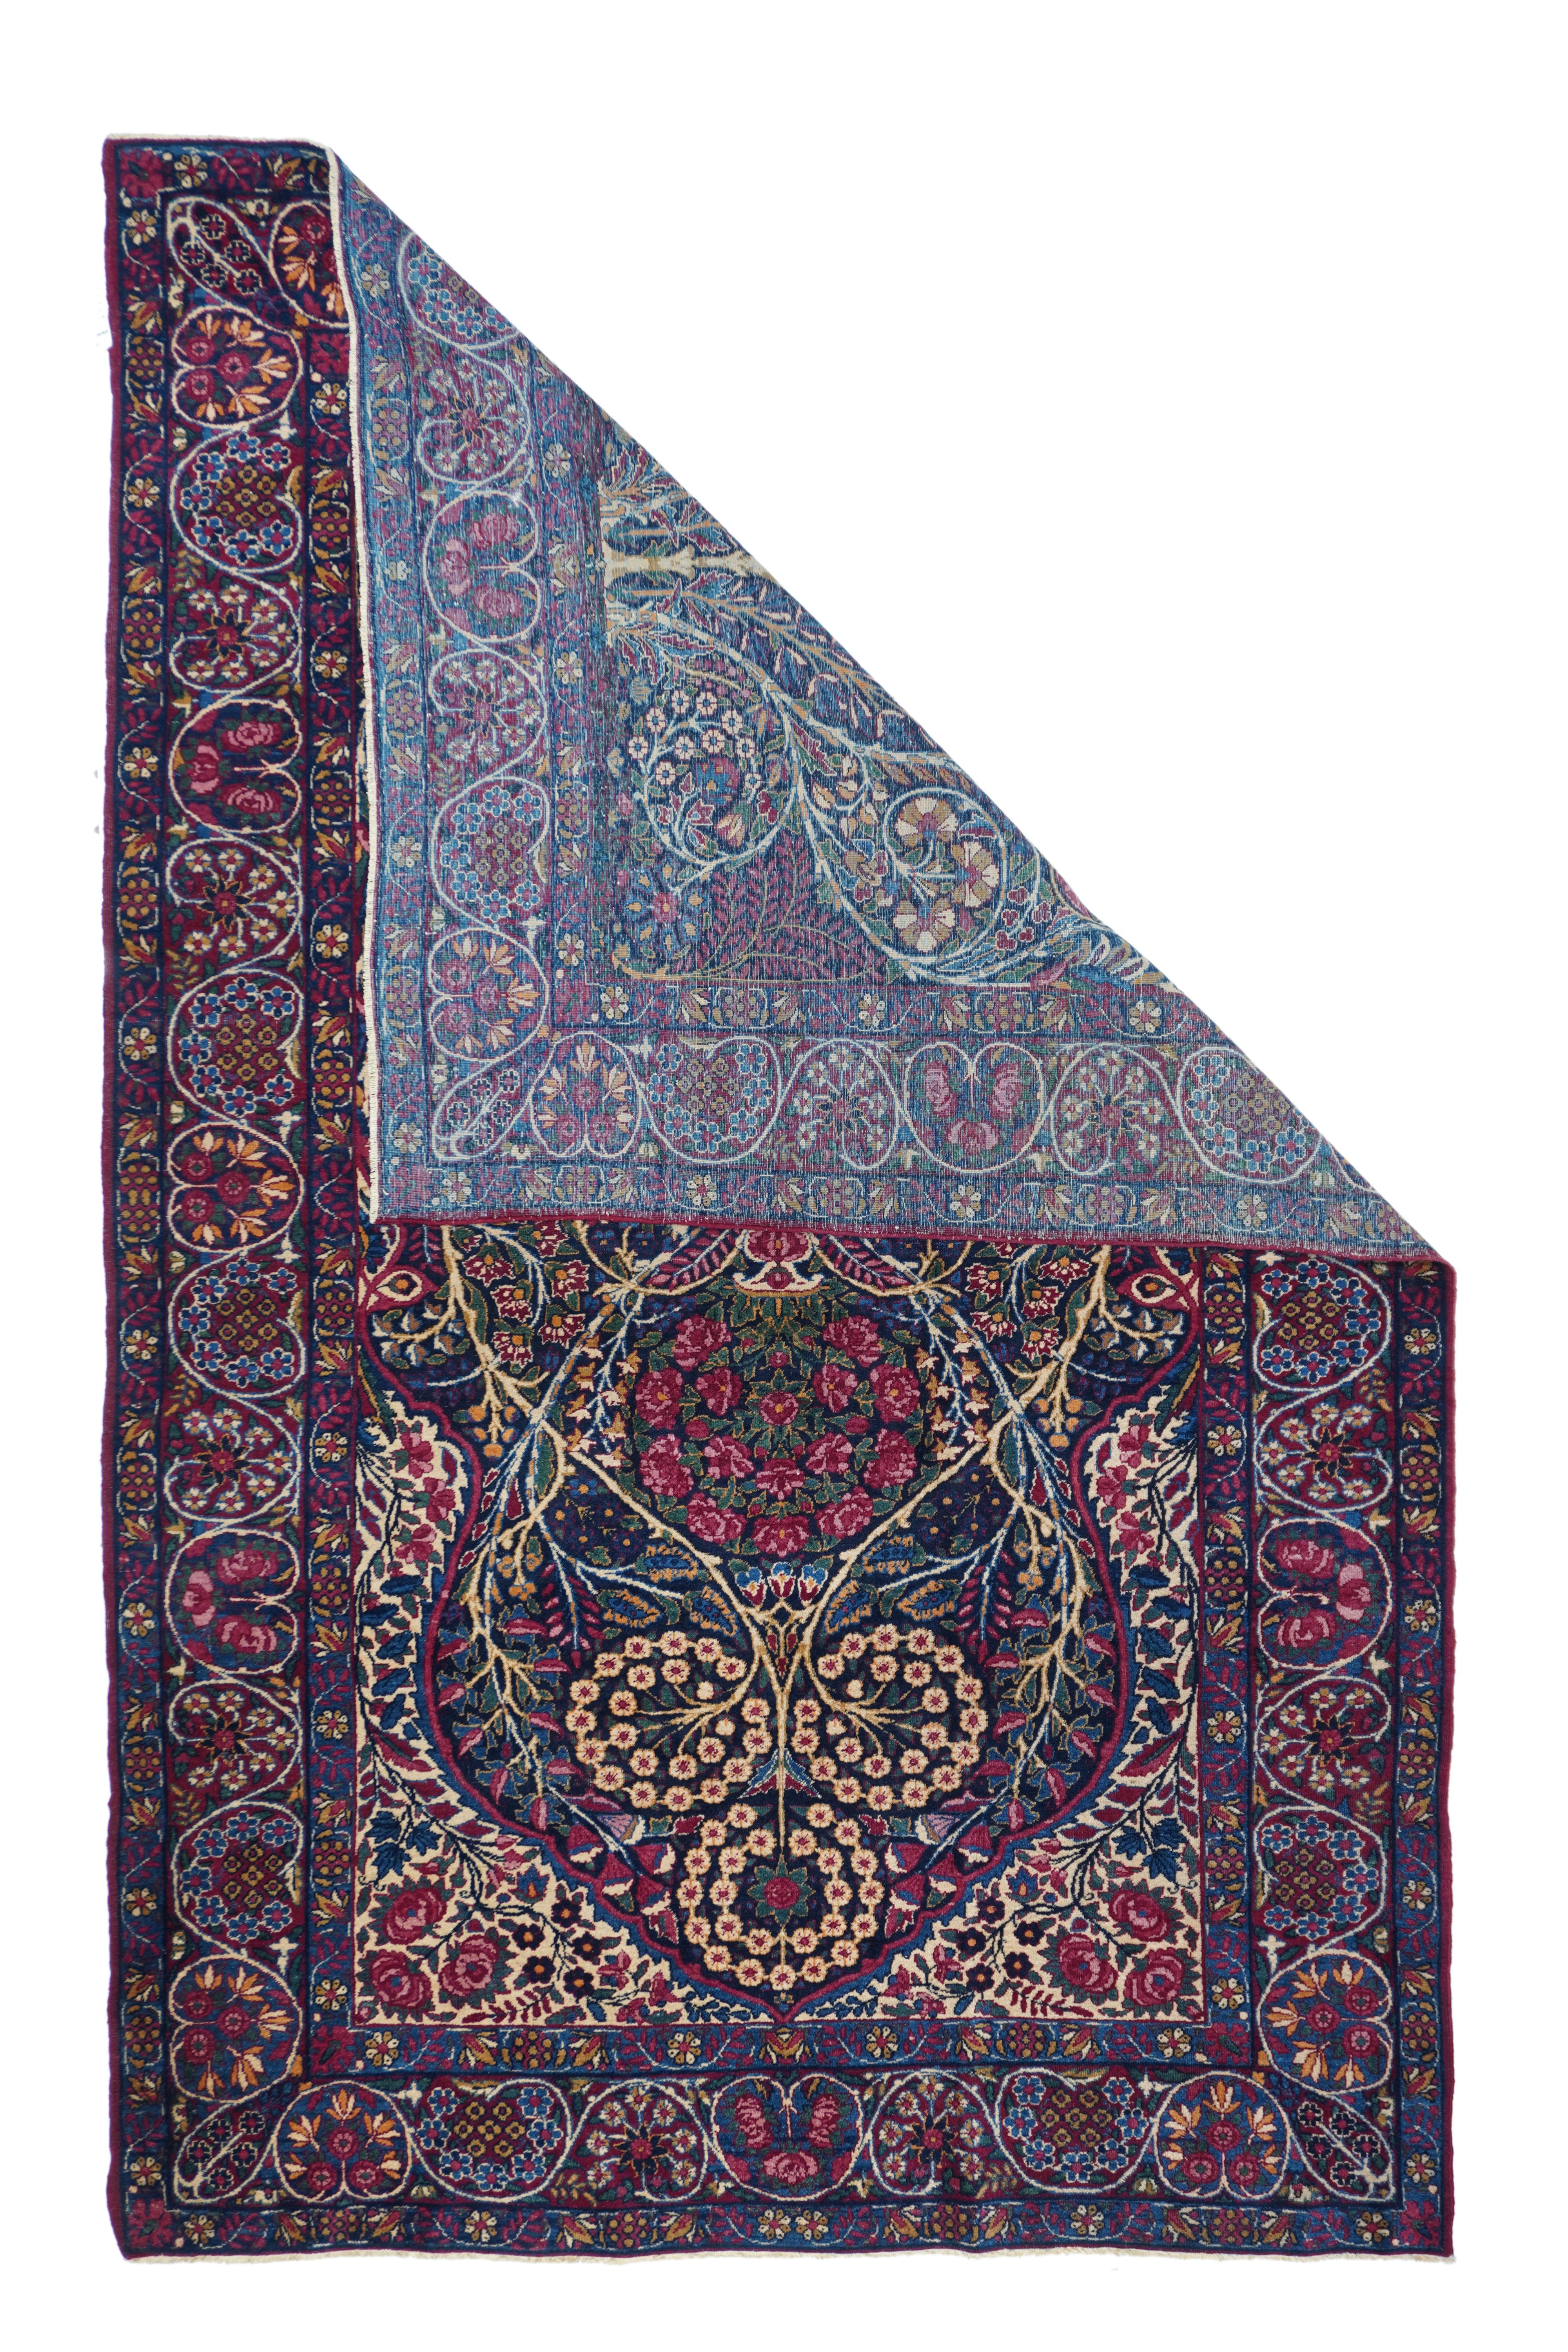 Antique Kerman Rug 5'7'' x 8'7''. This niche layout SE Persian urban scatter shows a slender tree, bifurcating and rejoining, with accents of double floret wreaths at the apex and millefleurs-style vinery and volutes throughout. Navy field with